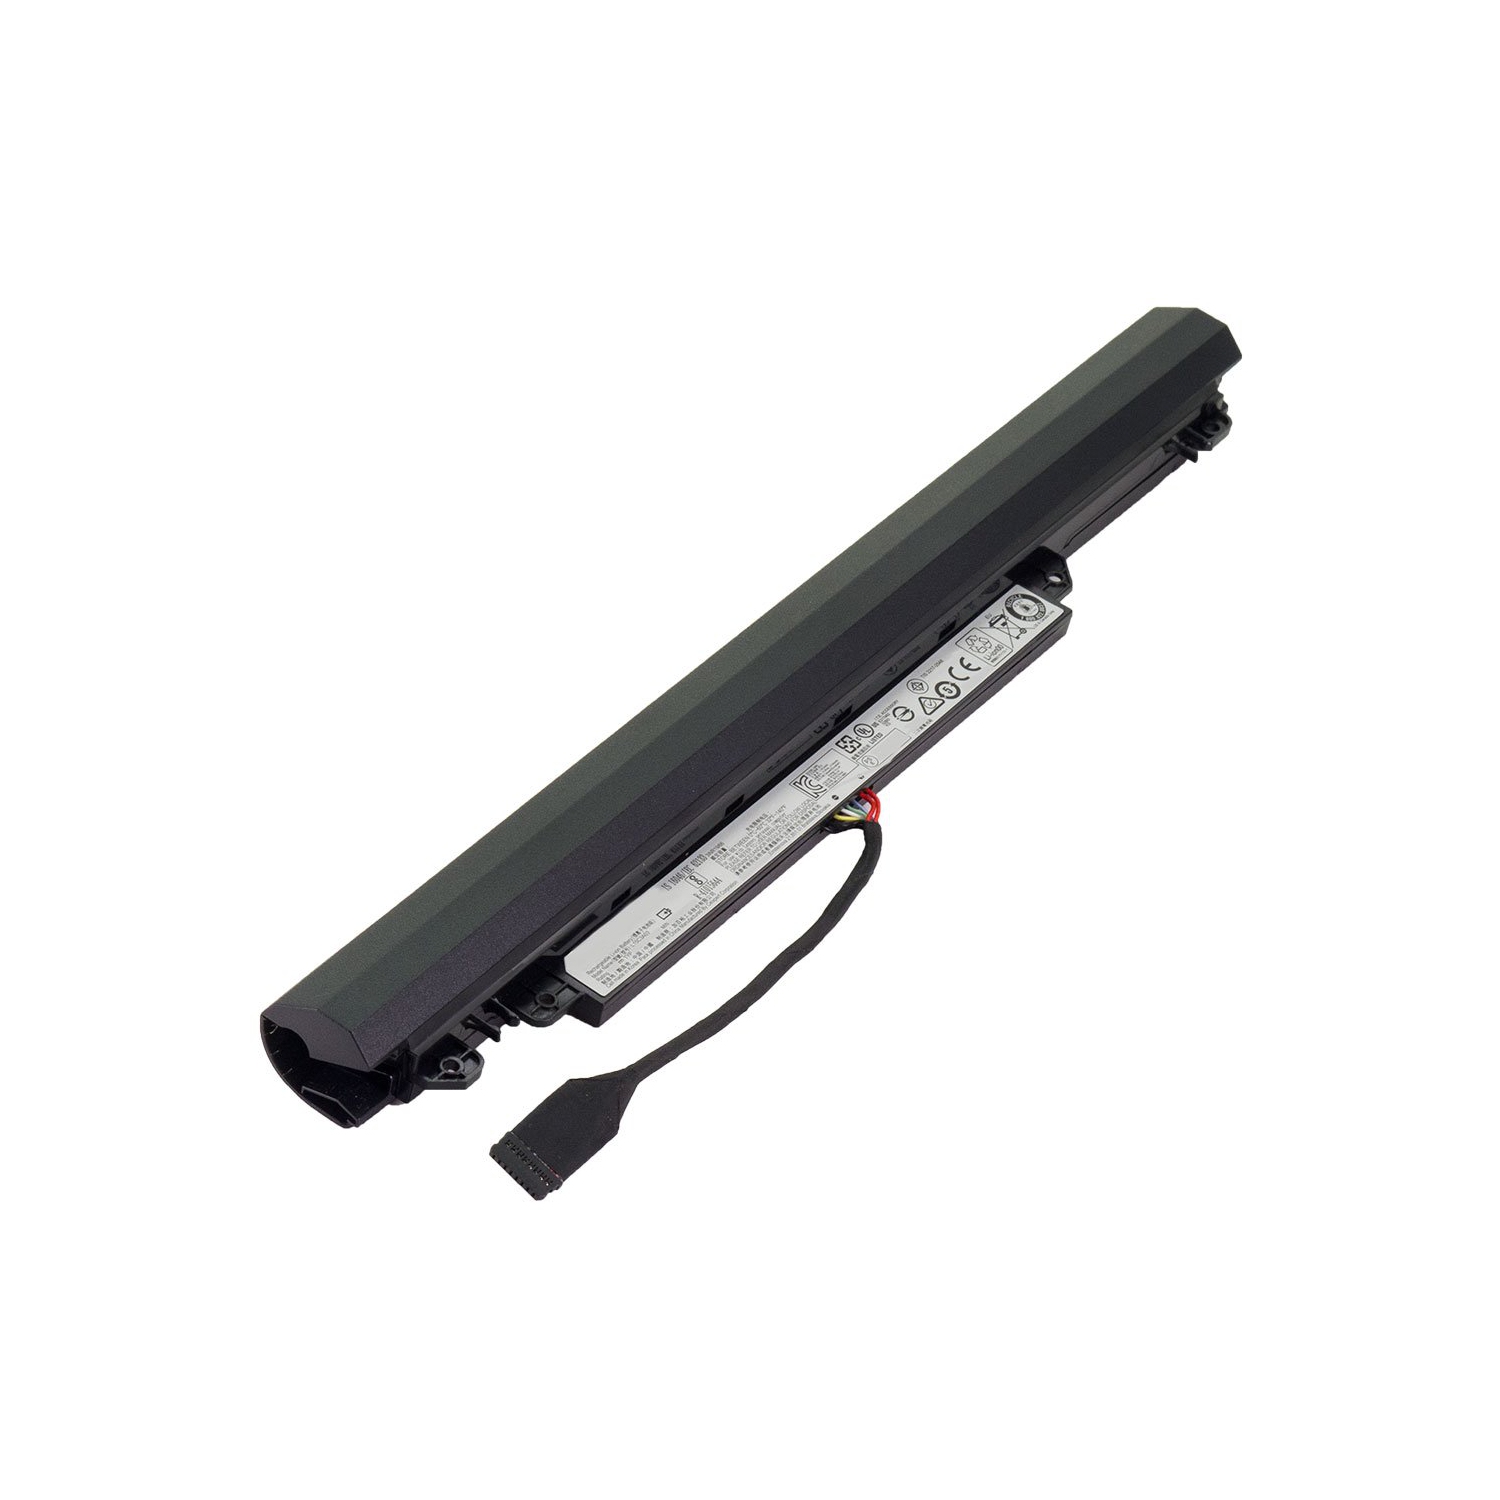 Laptop Battery Replacement for Lenovo IdeaPad 110-15ISK, 5B10L04166, 5B10L04215, L15C3A03, L15S3A02